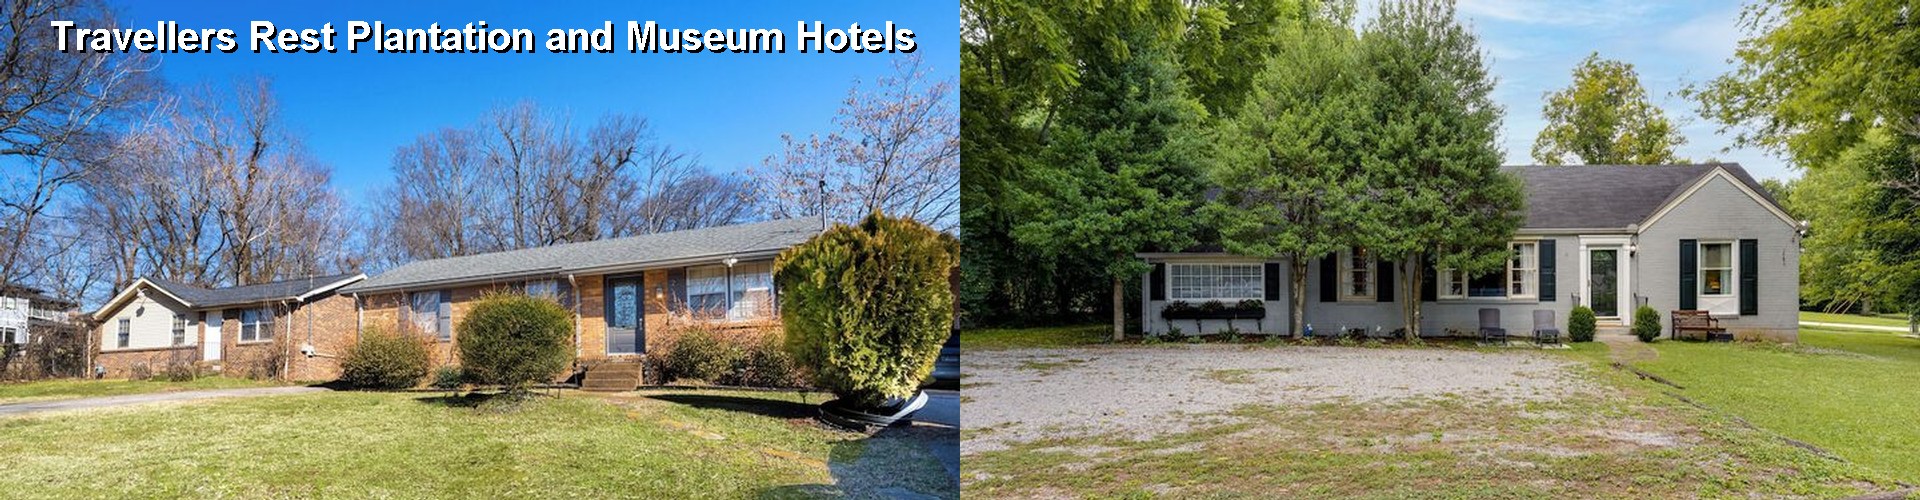 5 Best Hotels near Travellers Rest Plantation and Museum